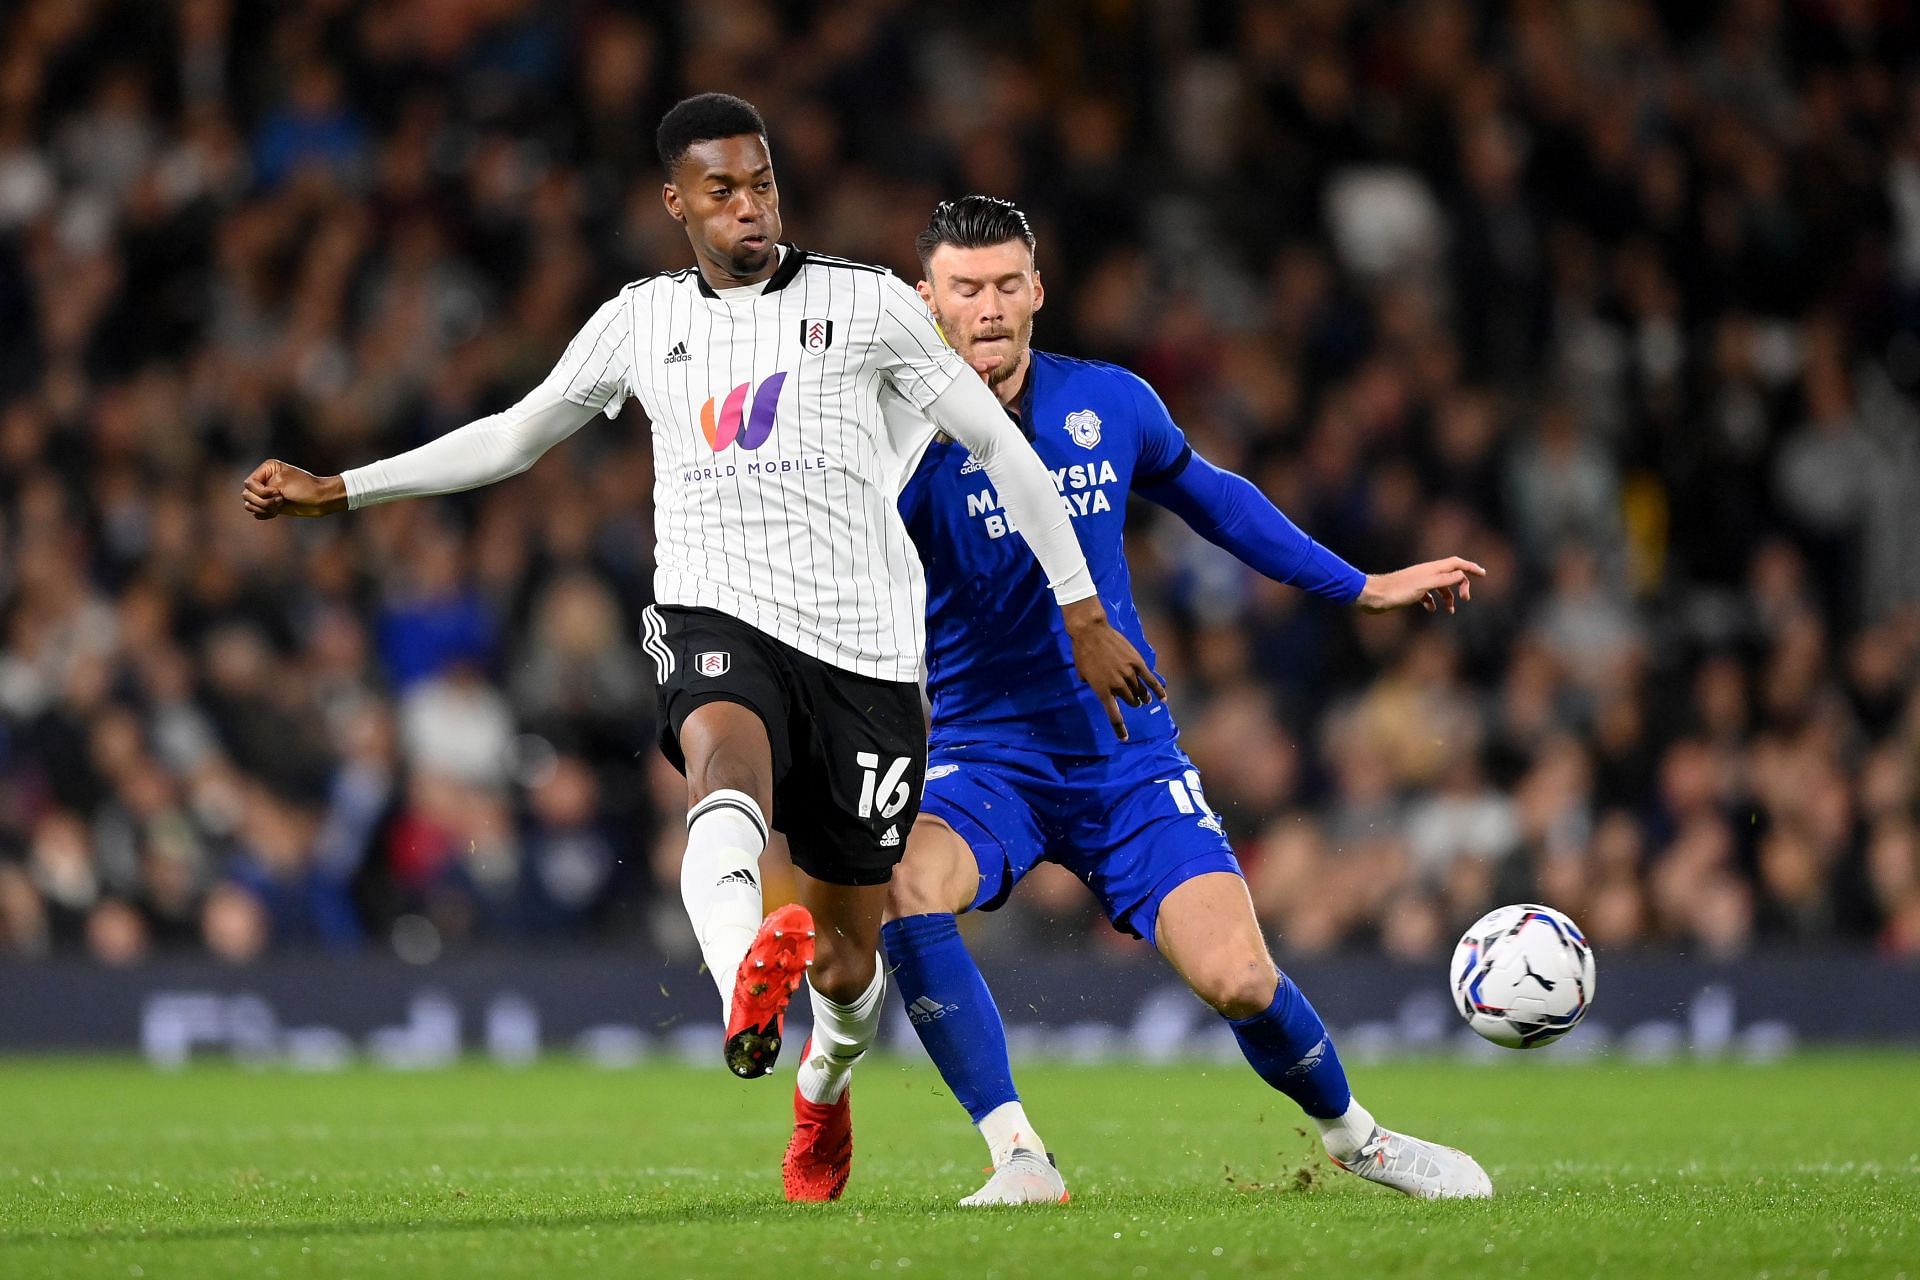 Adarabioyo will be a huge miss for Fulham